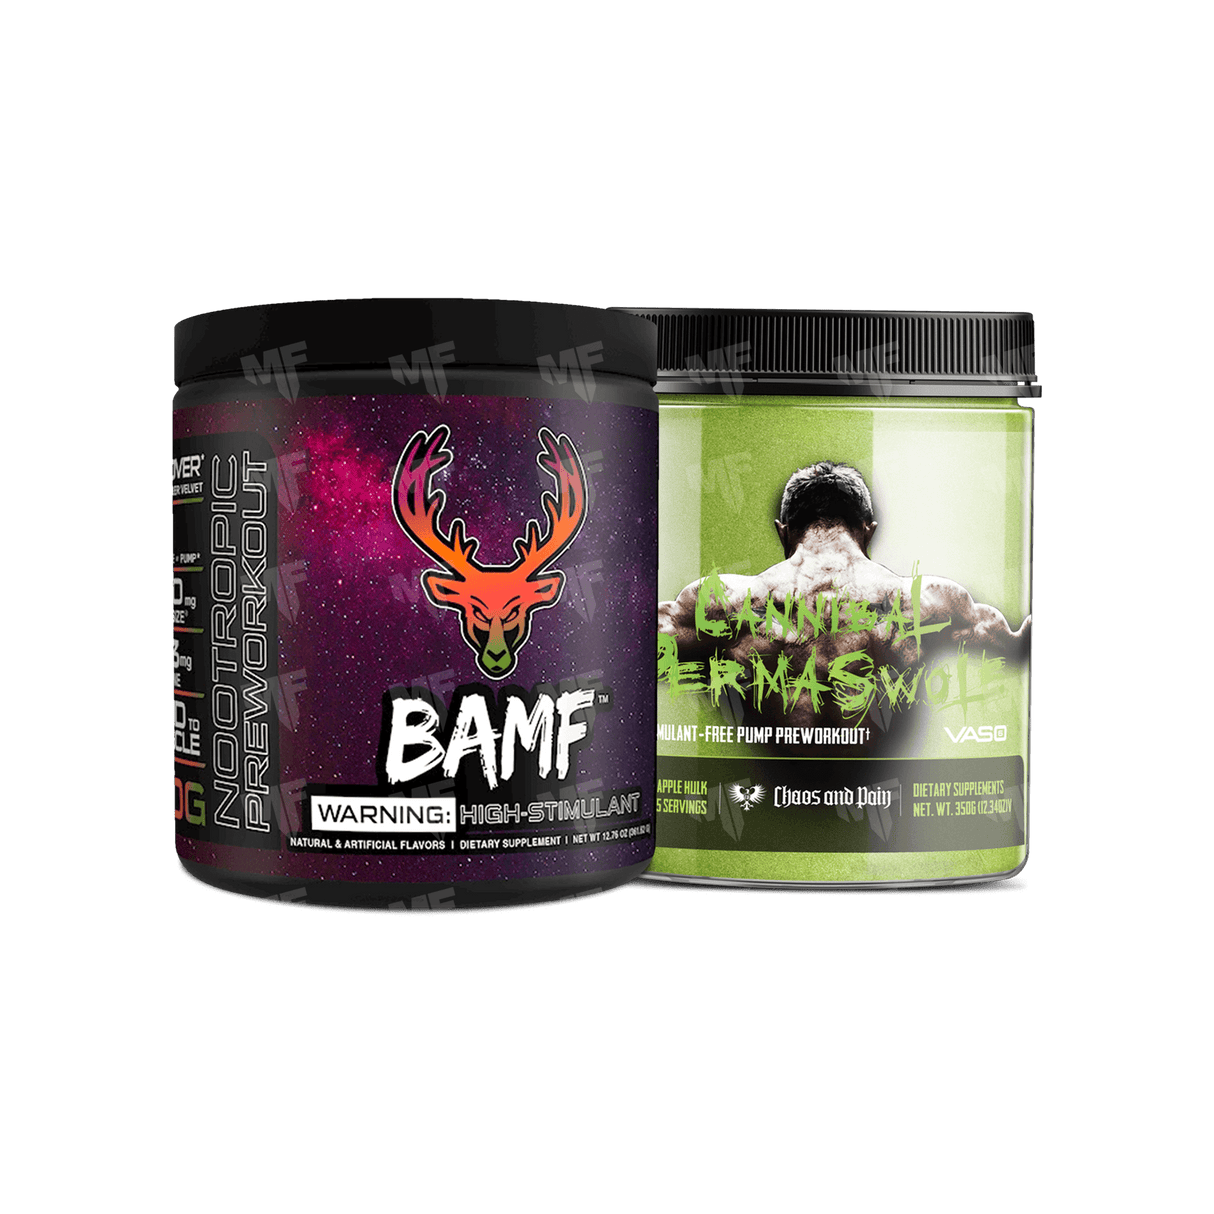 BAMF and Cannibal Permaswole - Muscle Factory, LLC